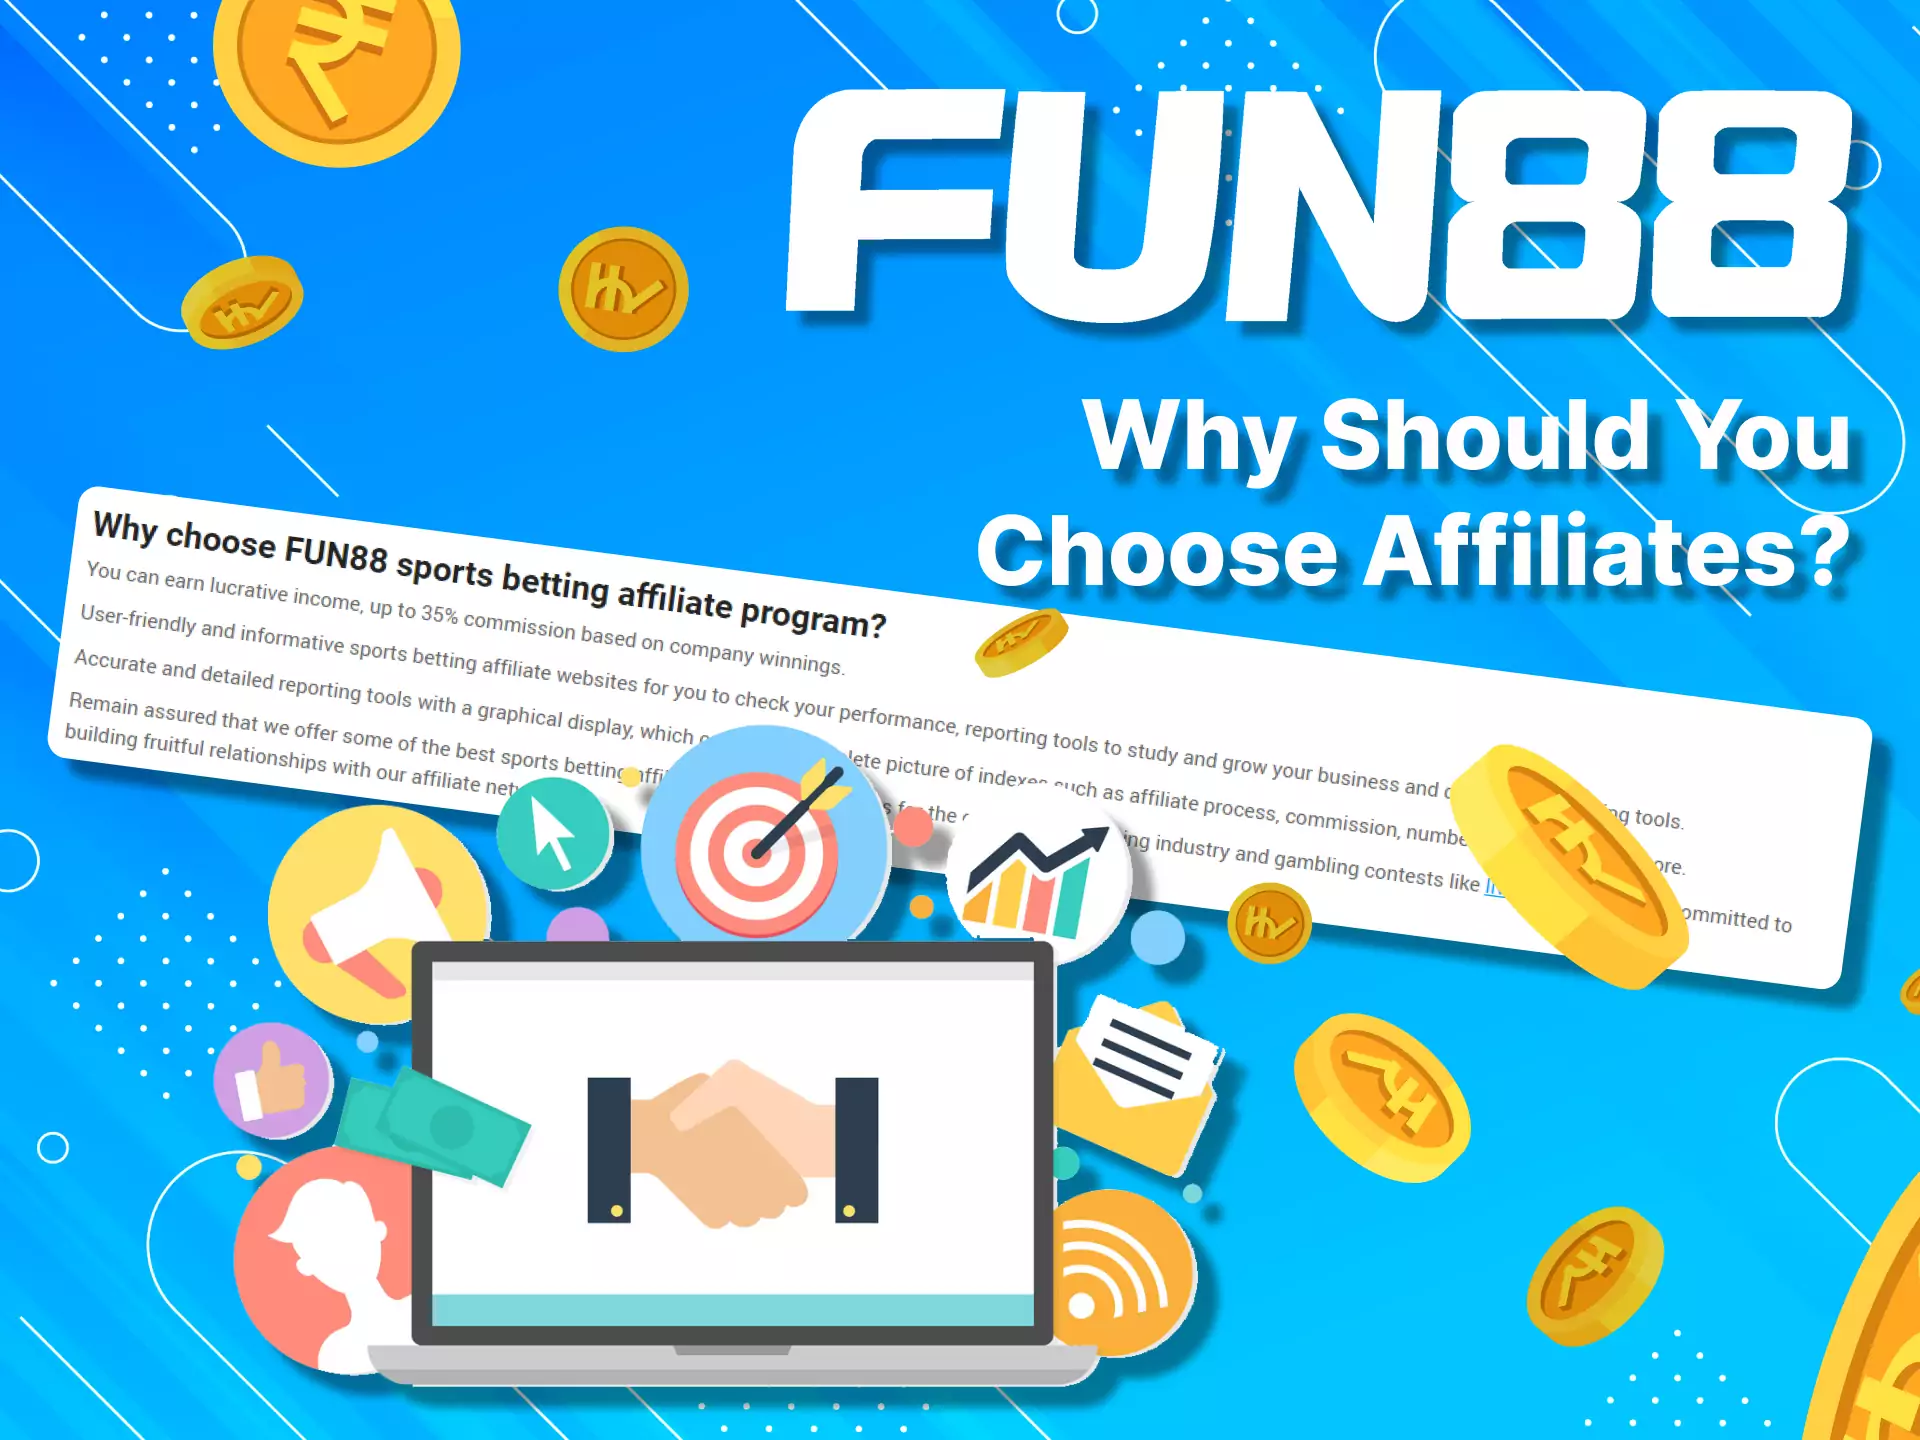 The Fun88 affiliate program allows for increasing profit from gambling and betting.